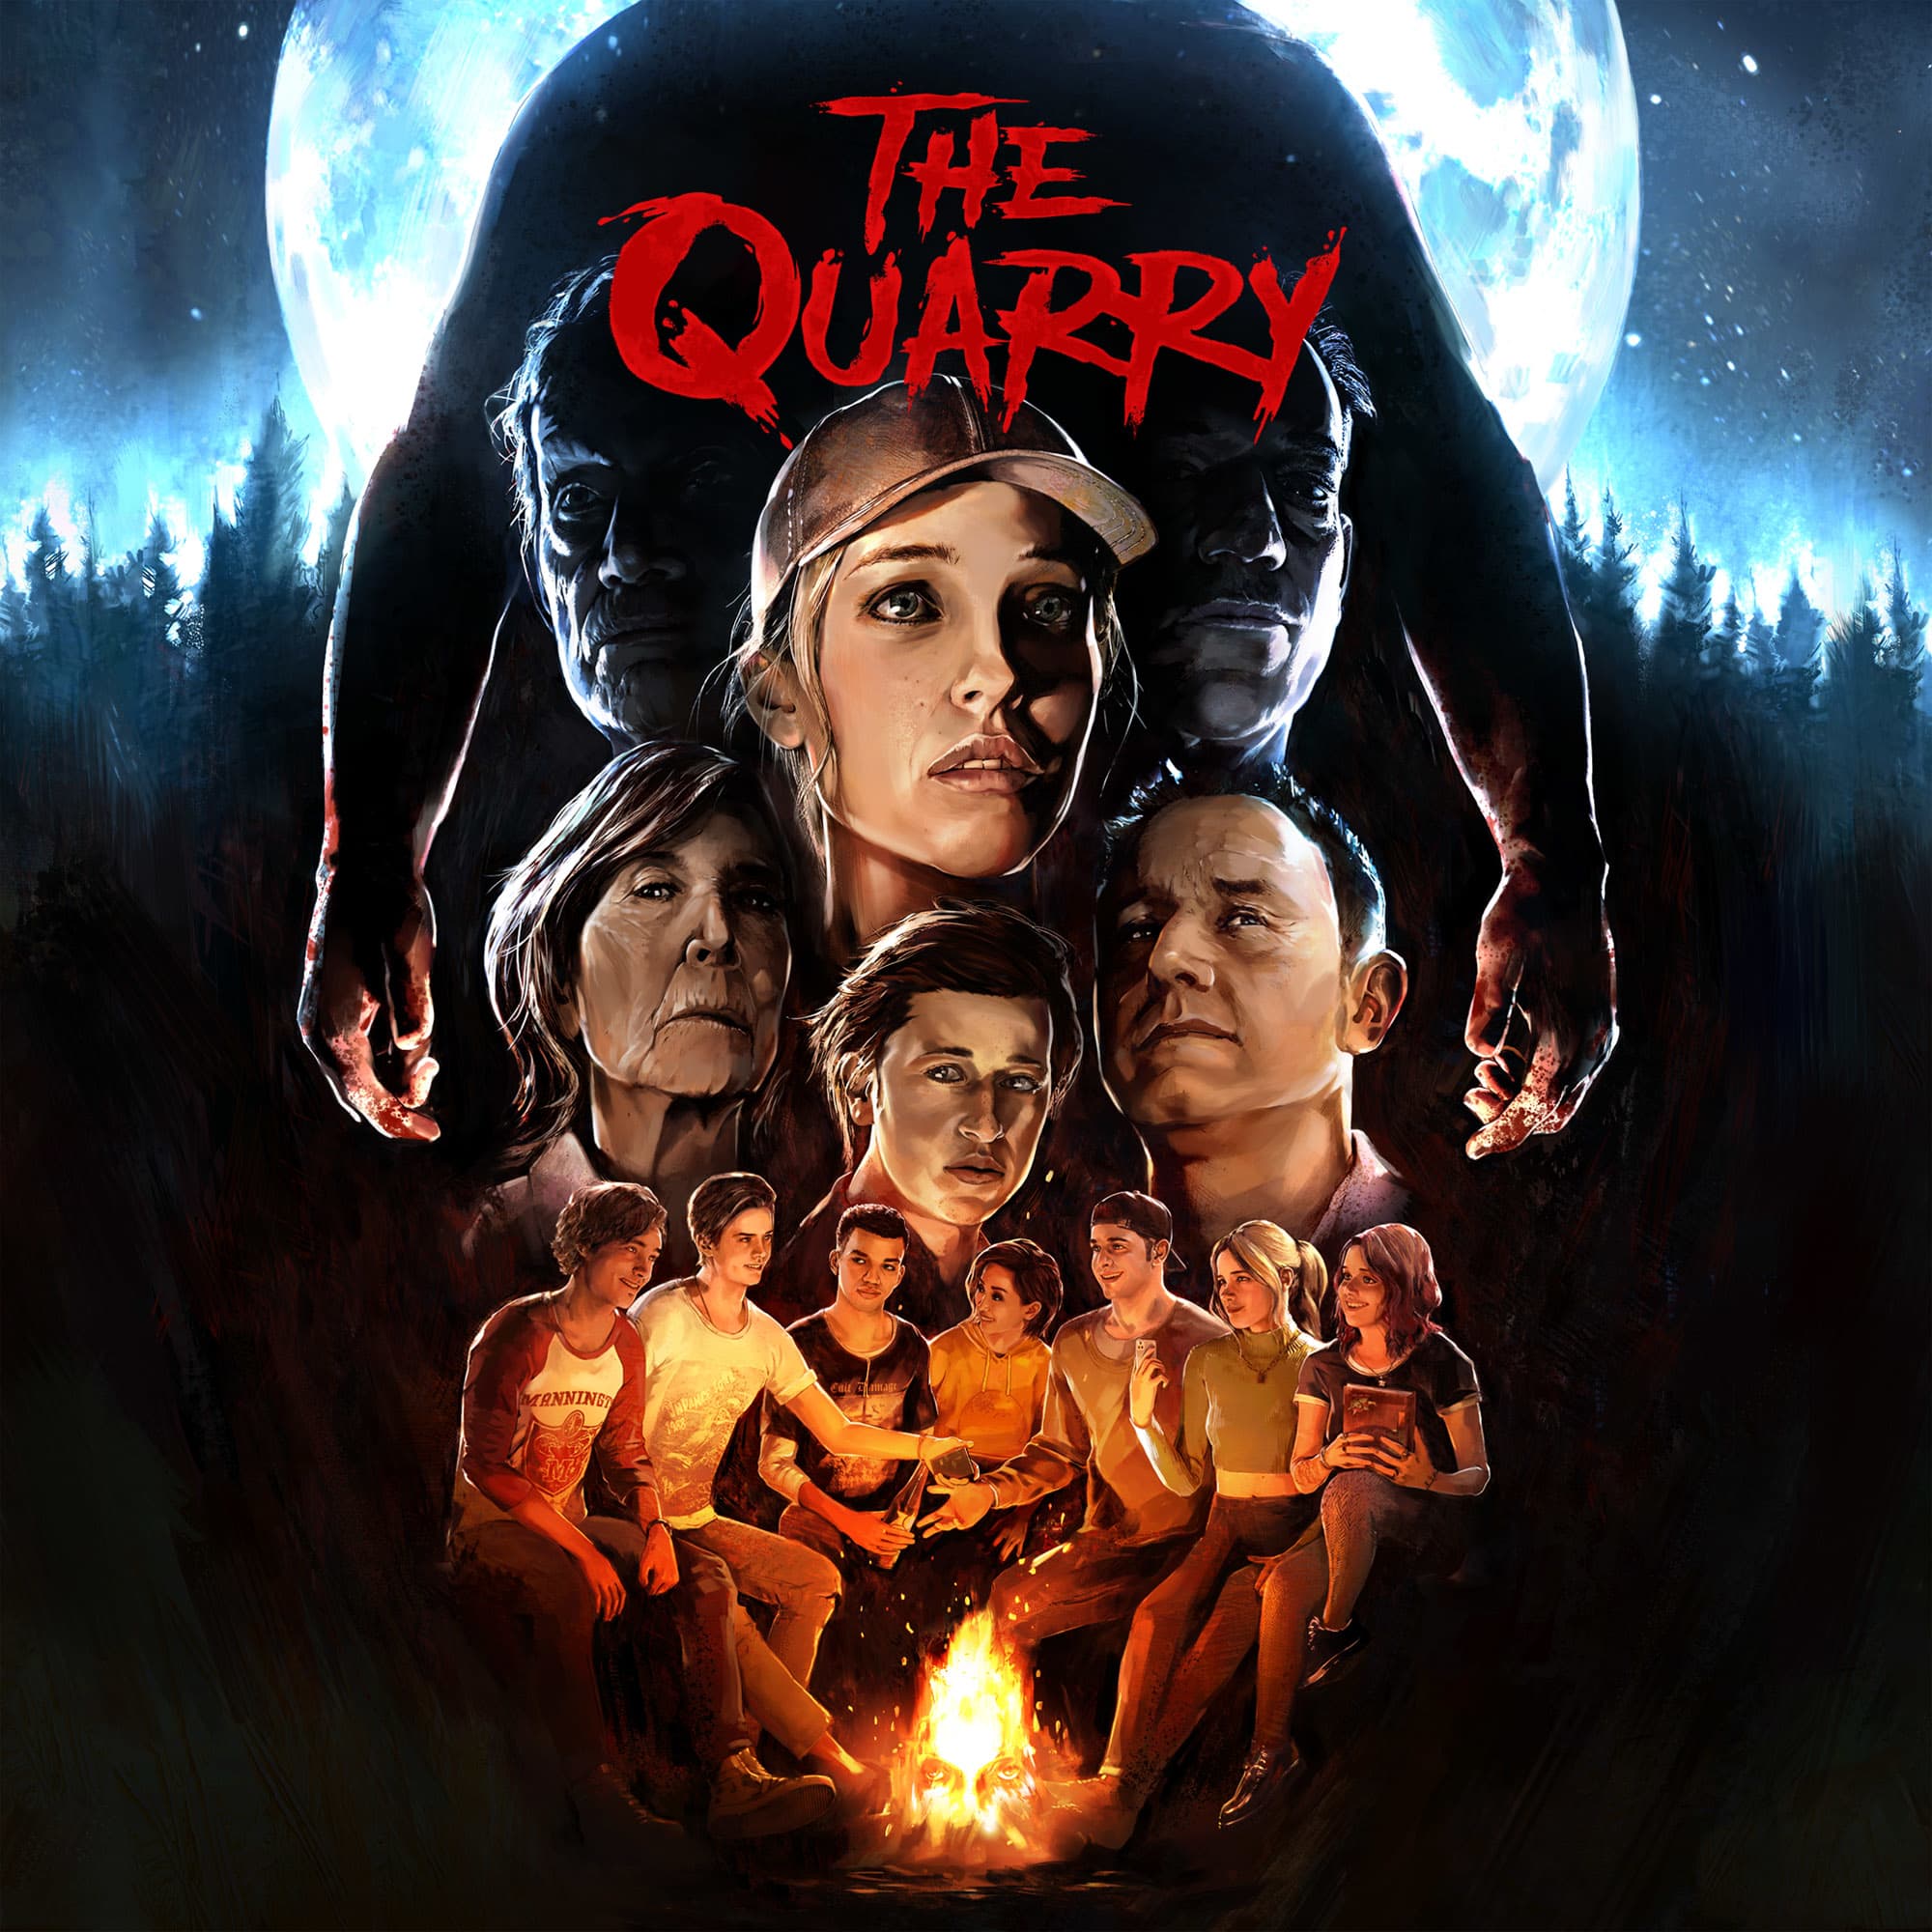 Key art for The Quarry, Supermassive Games' new interactive teen-horror drama game